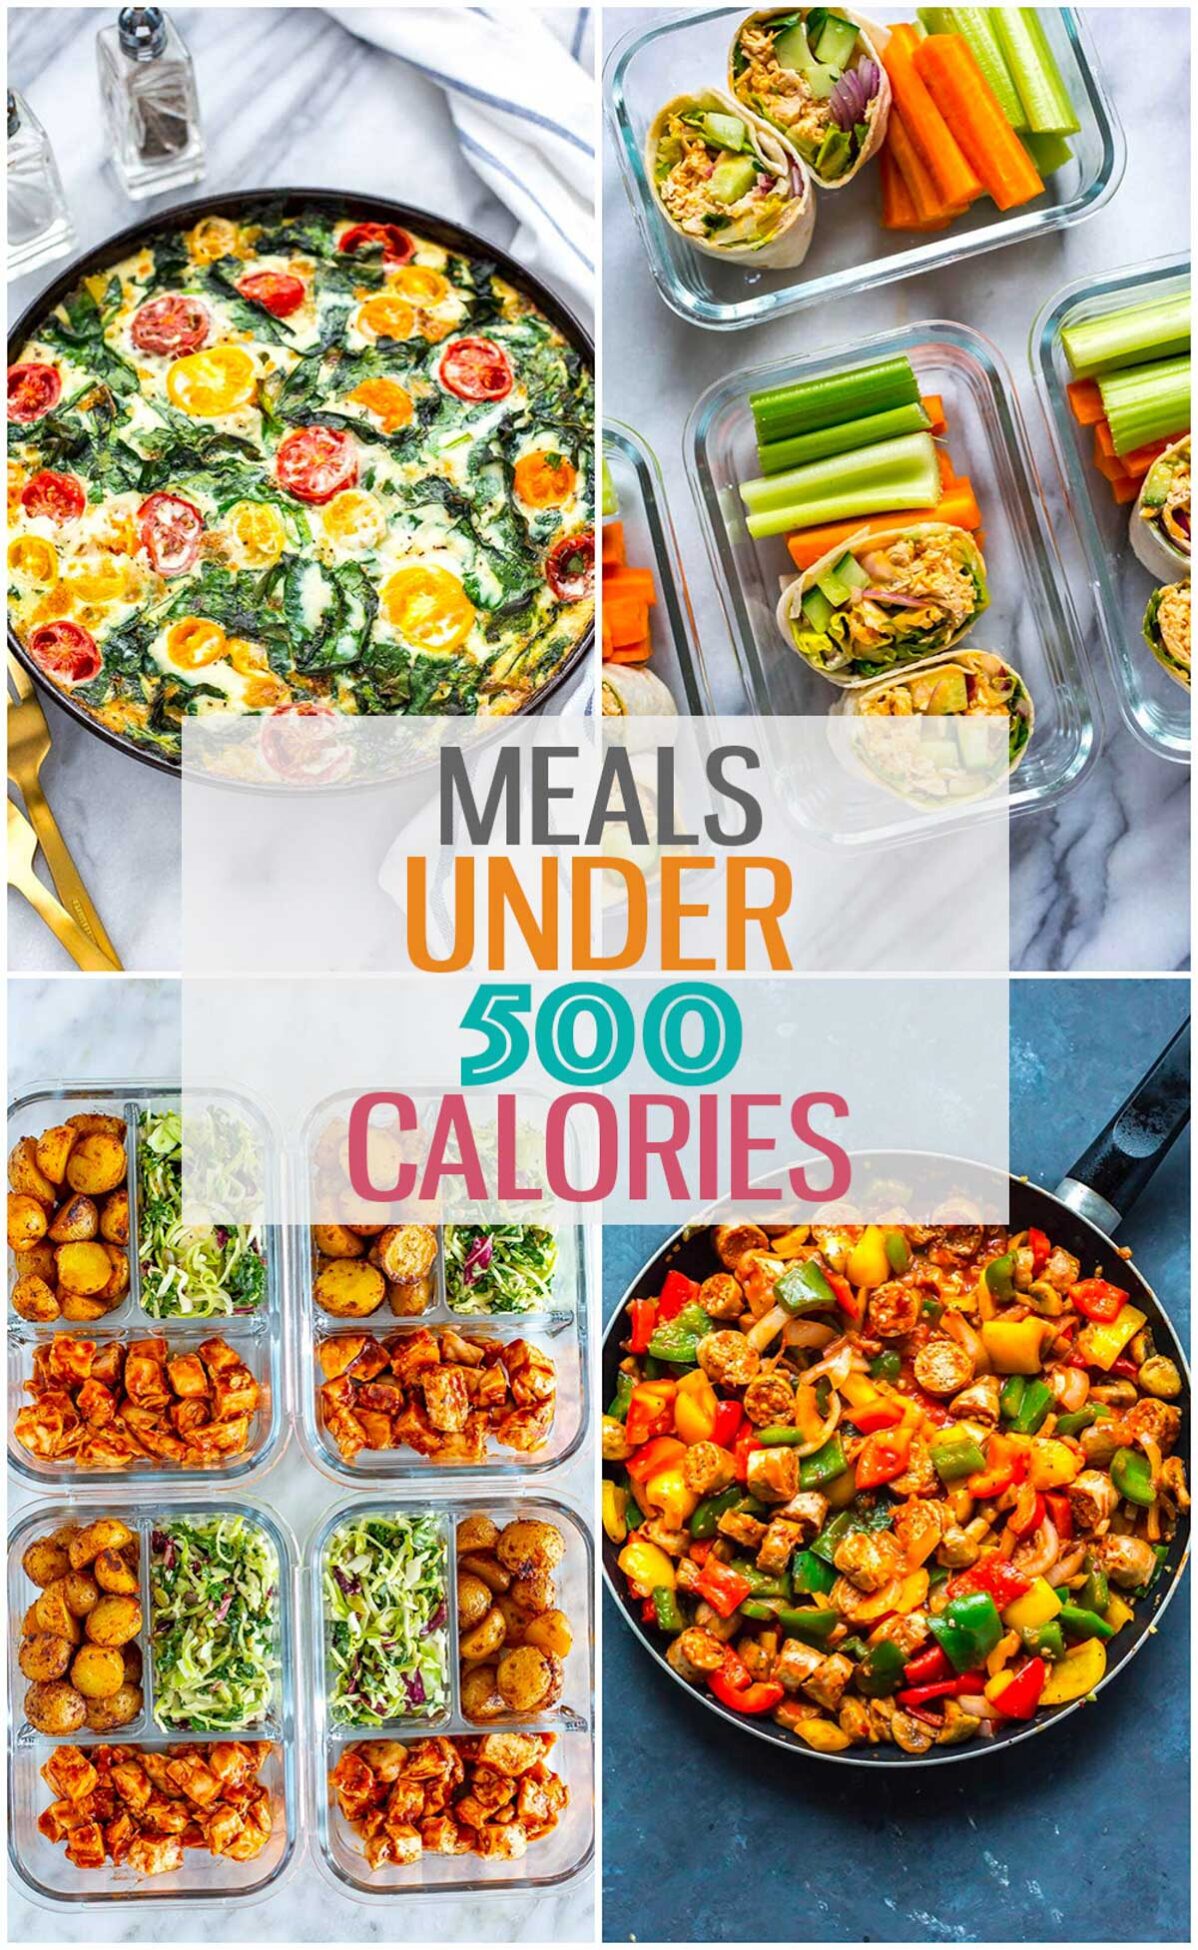 A collage of 4 different 500 calorie meals with the text "Meals Under 500 Calories" layered over top.